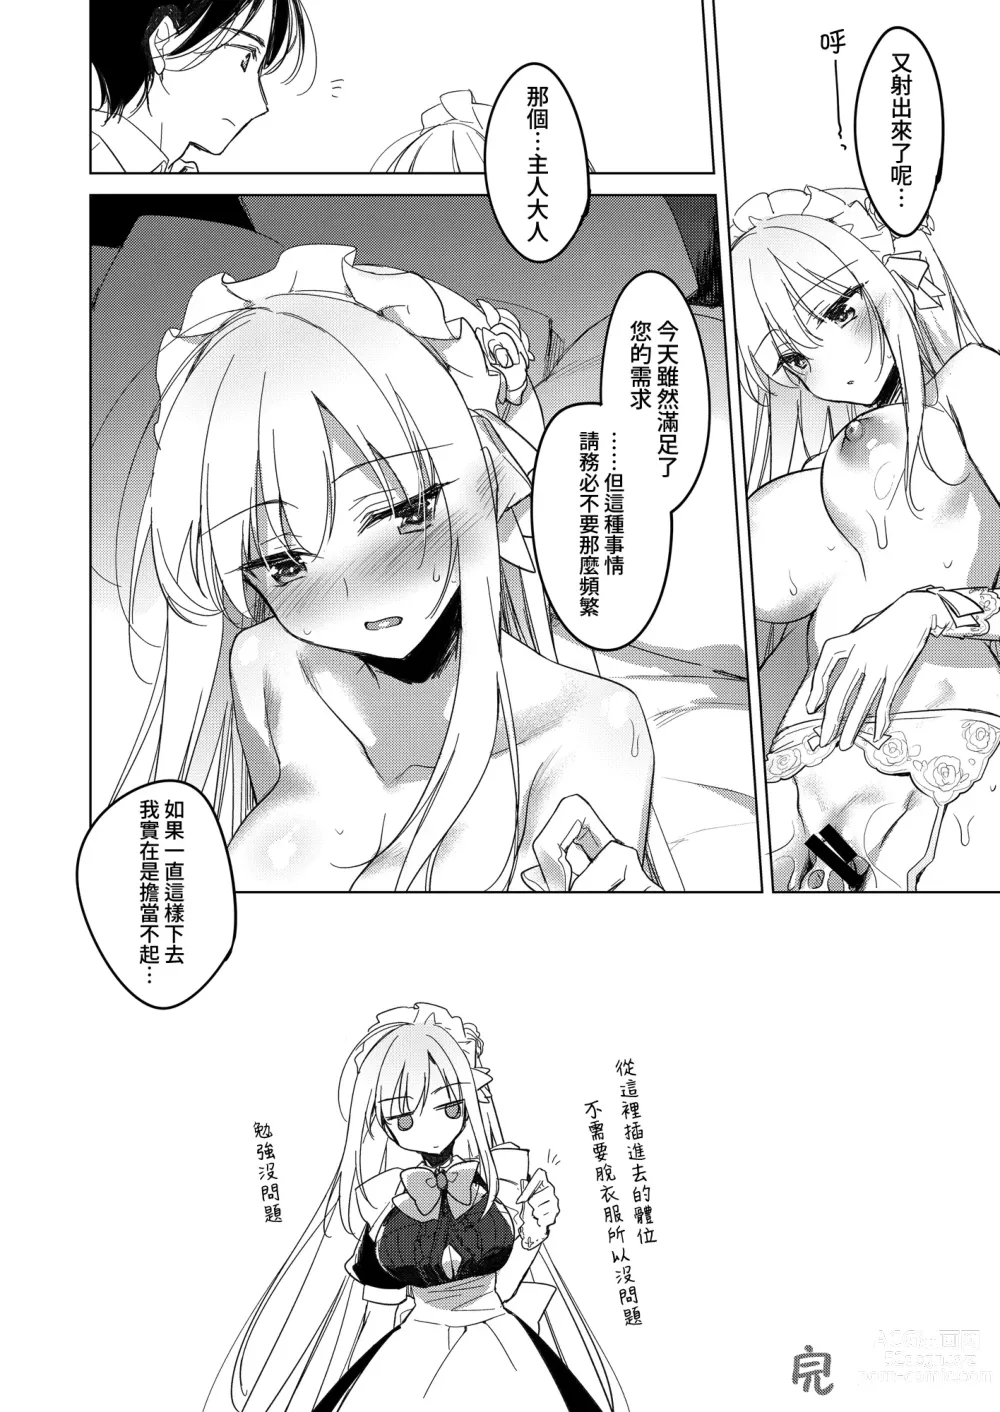 Page 26 of doujinshi 女僕之旅